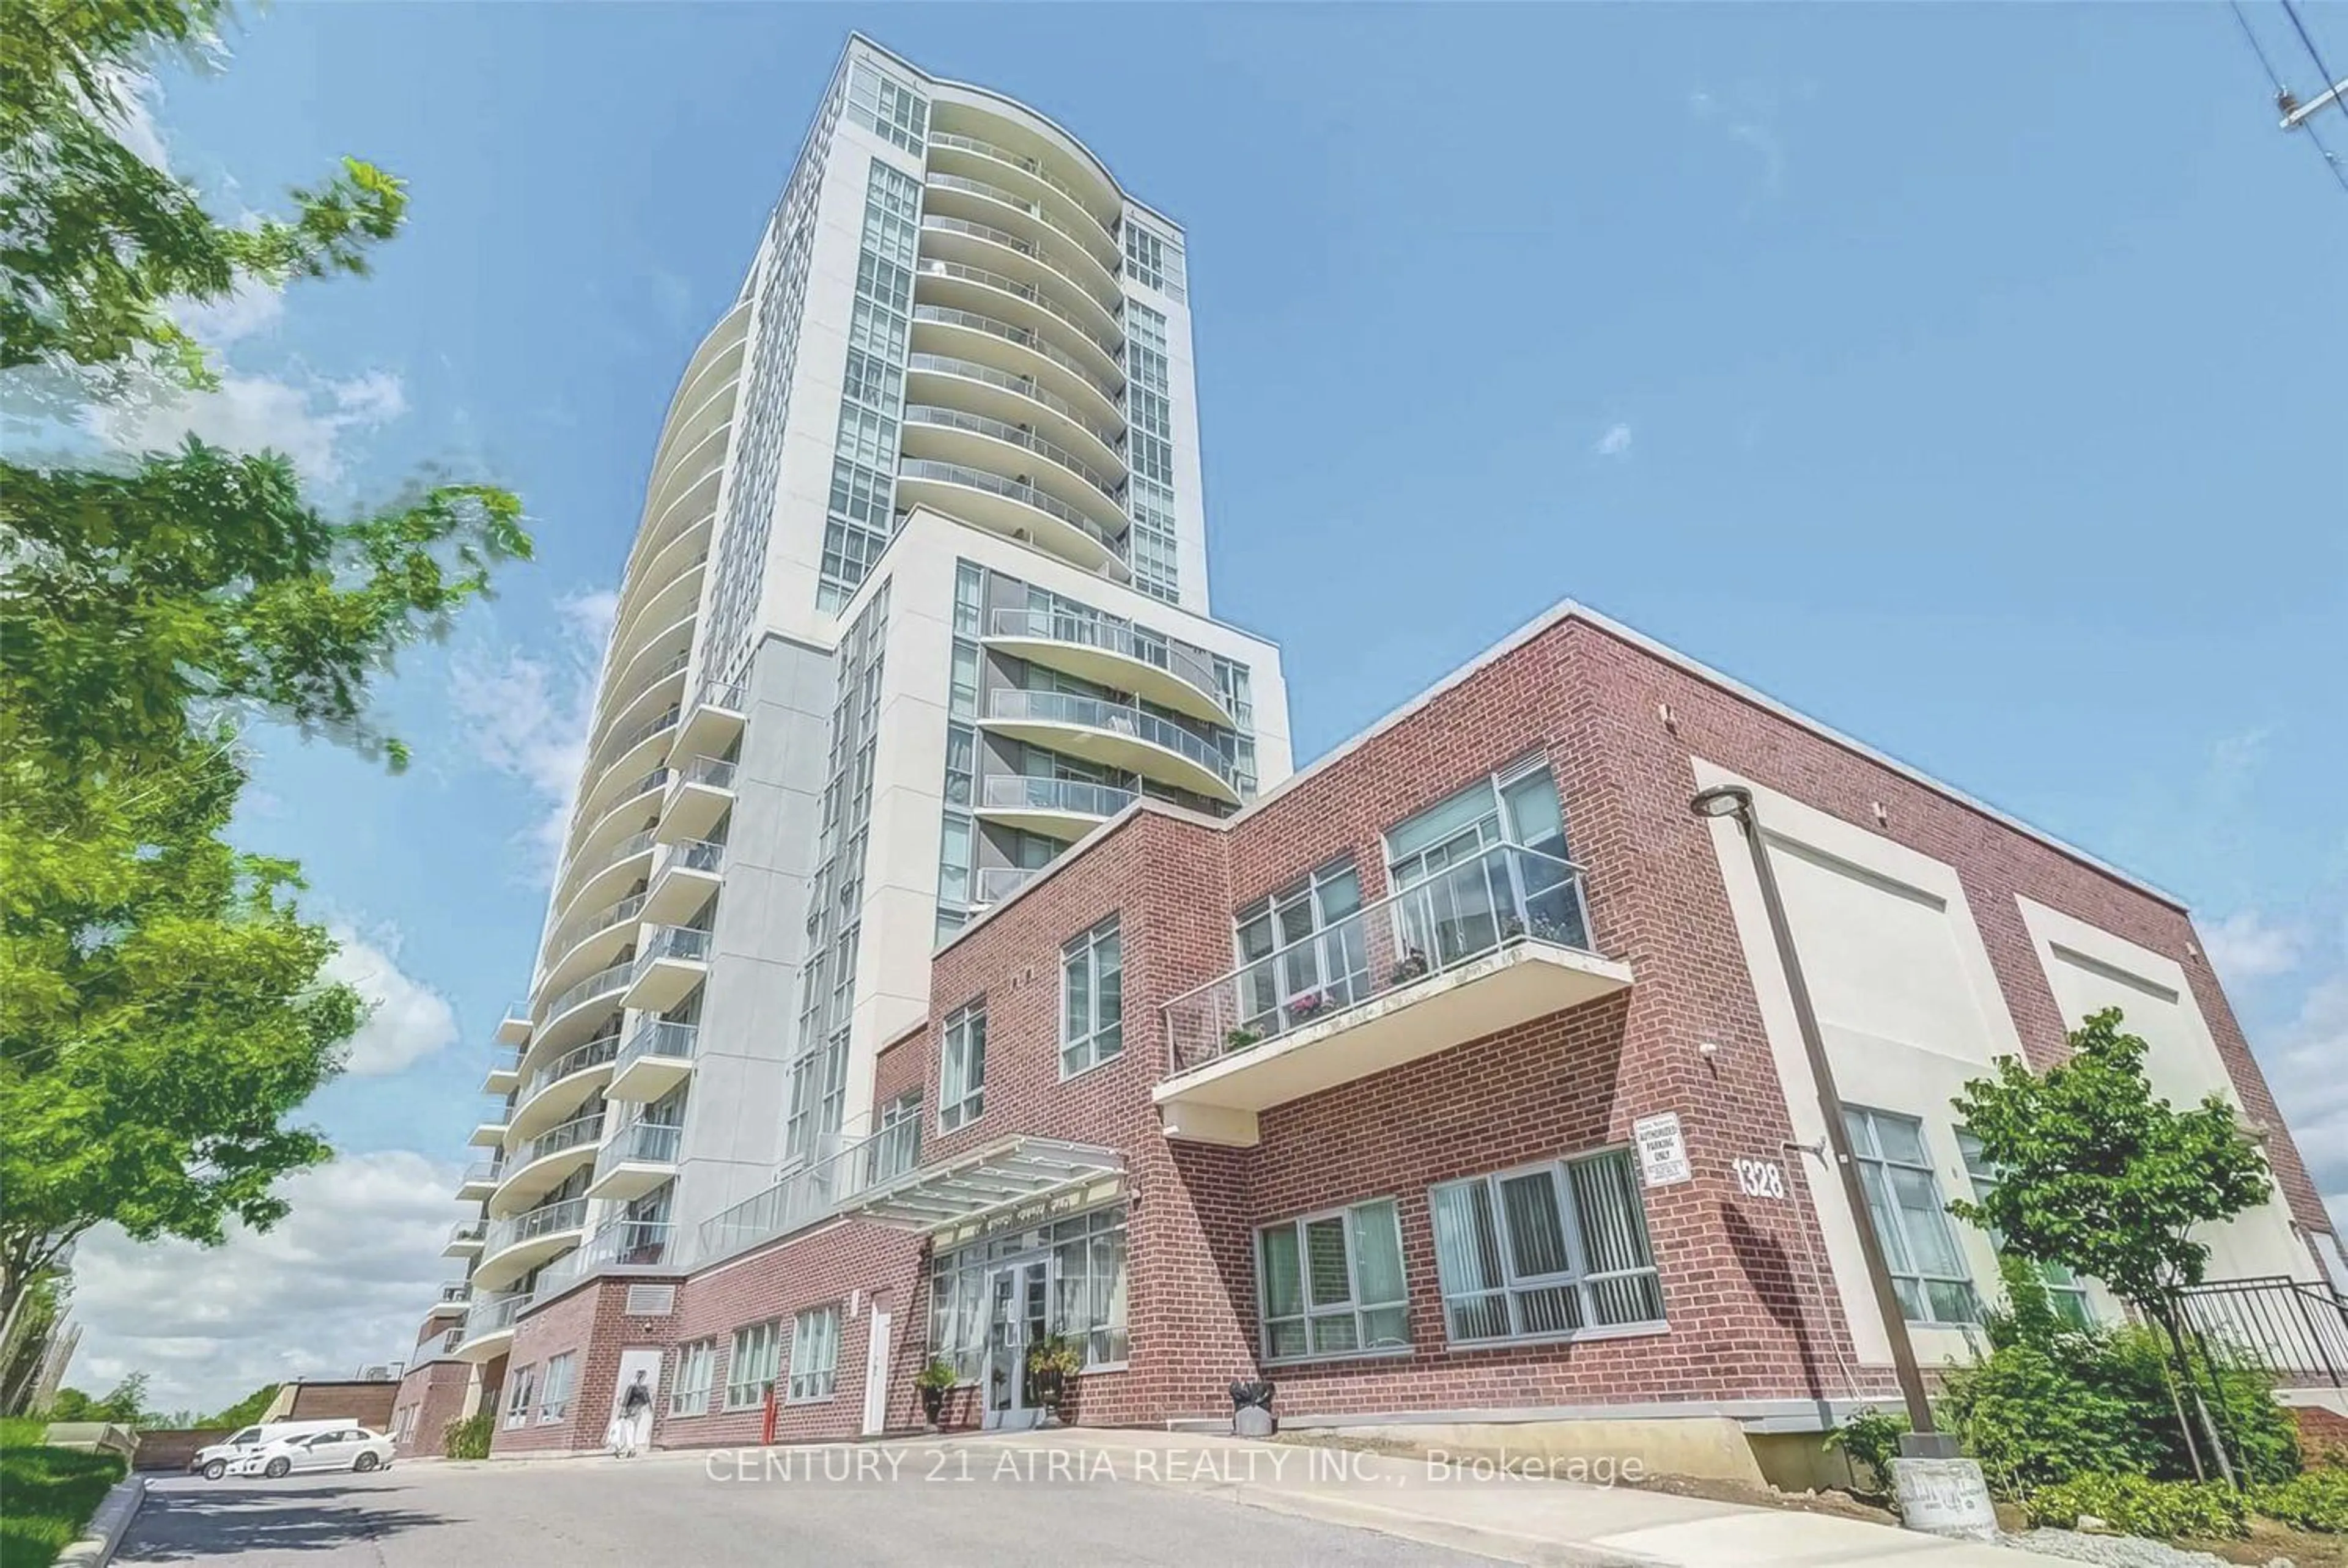 A pic from exterior of the house or condo for 1328 Birchmount Rd #811, Toronto Ontario M1R 0B6